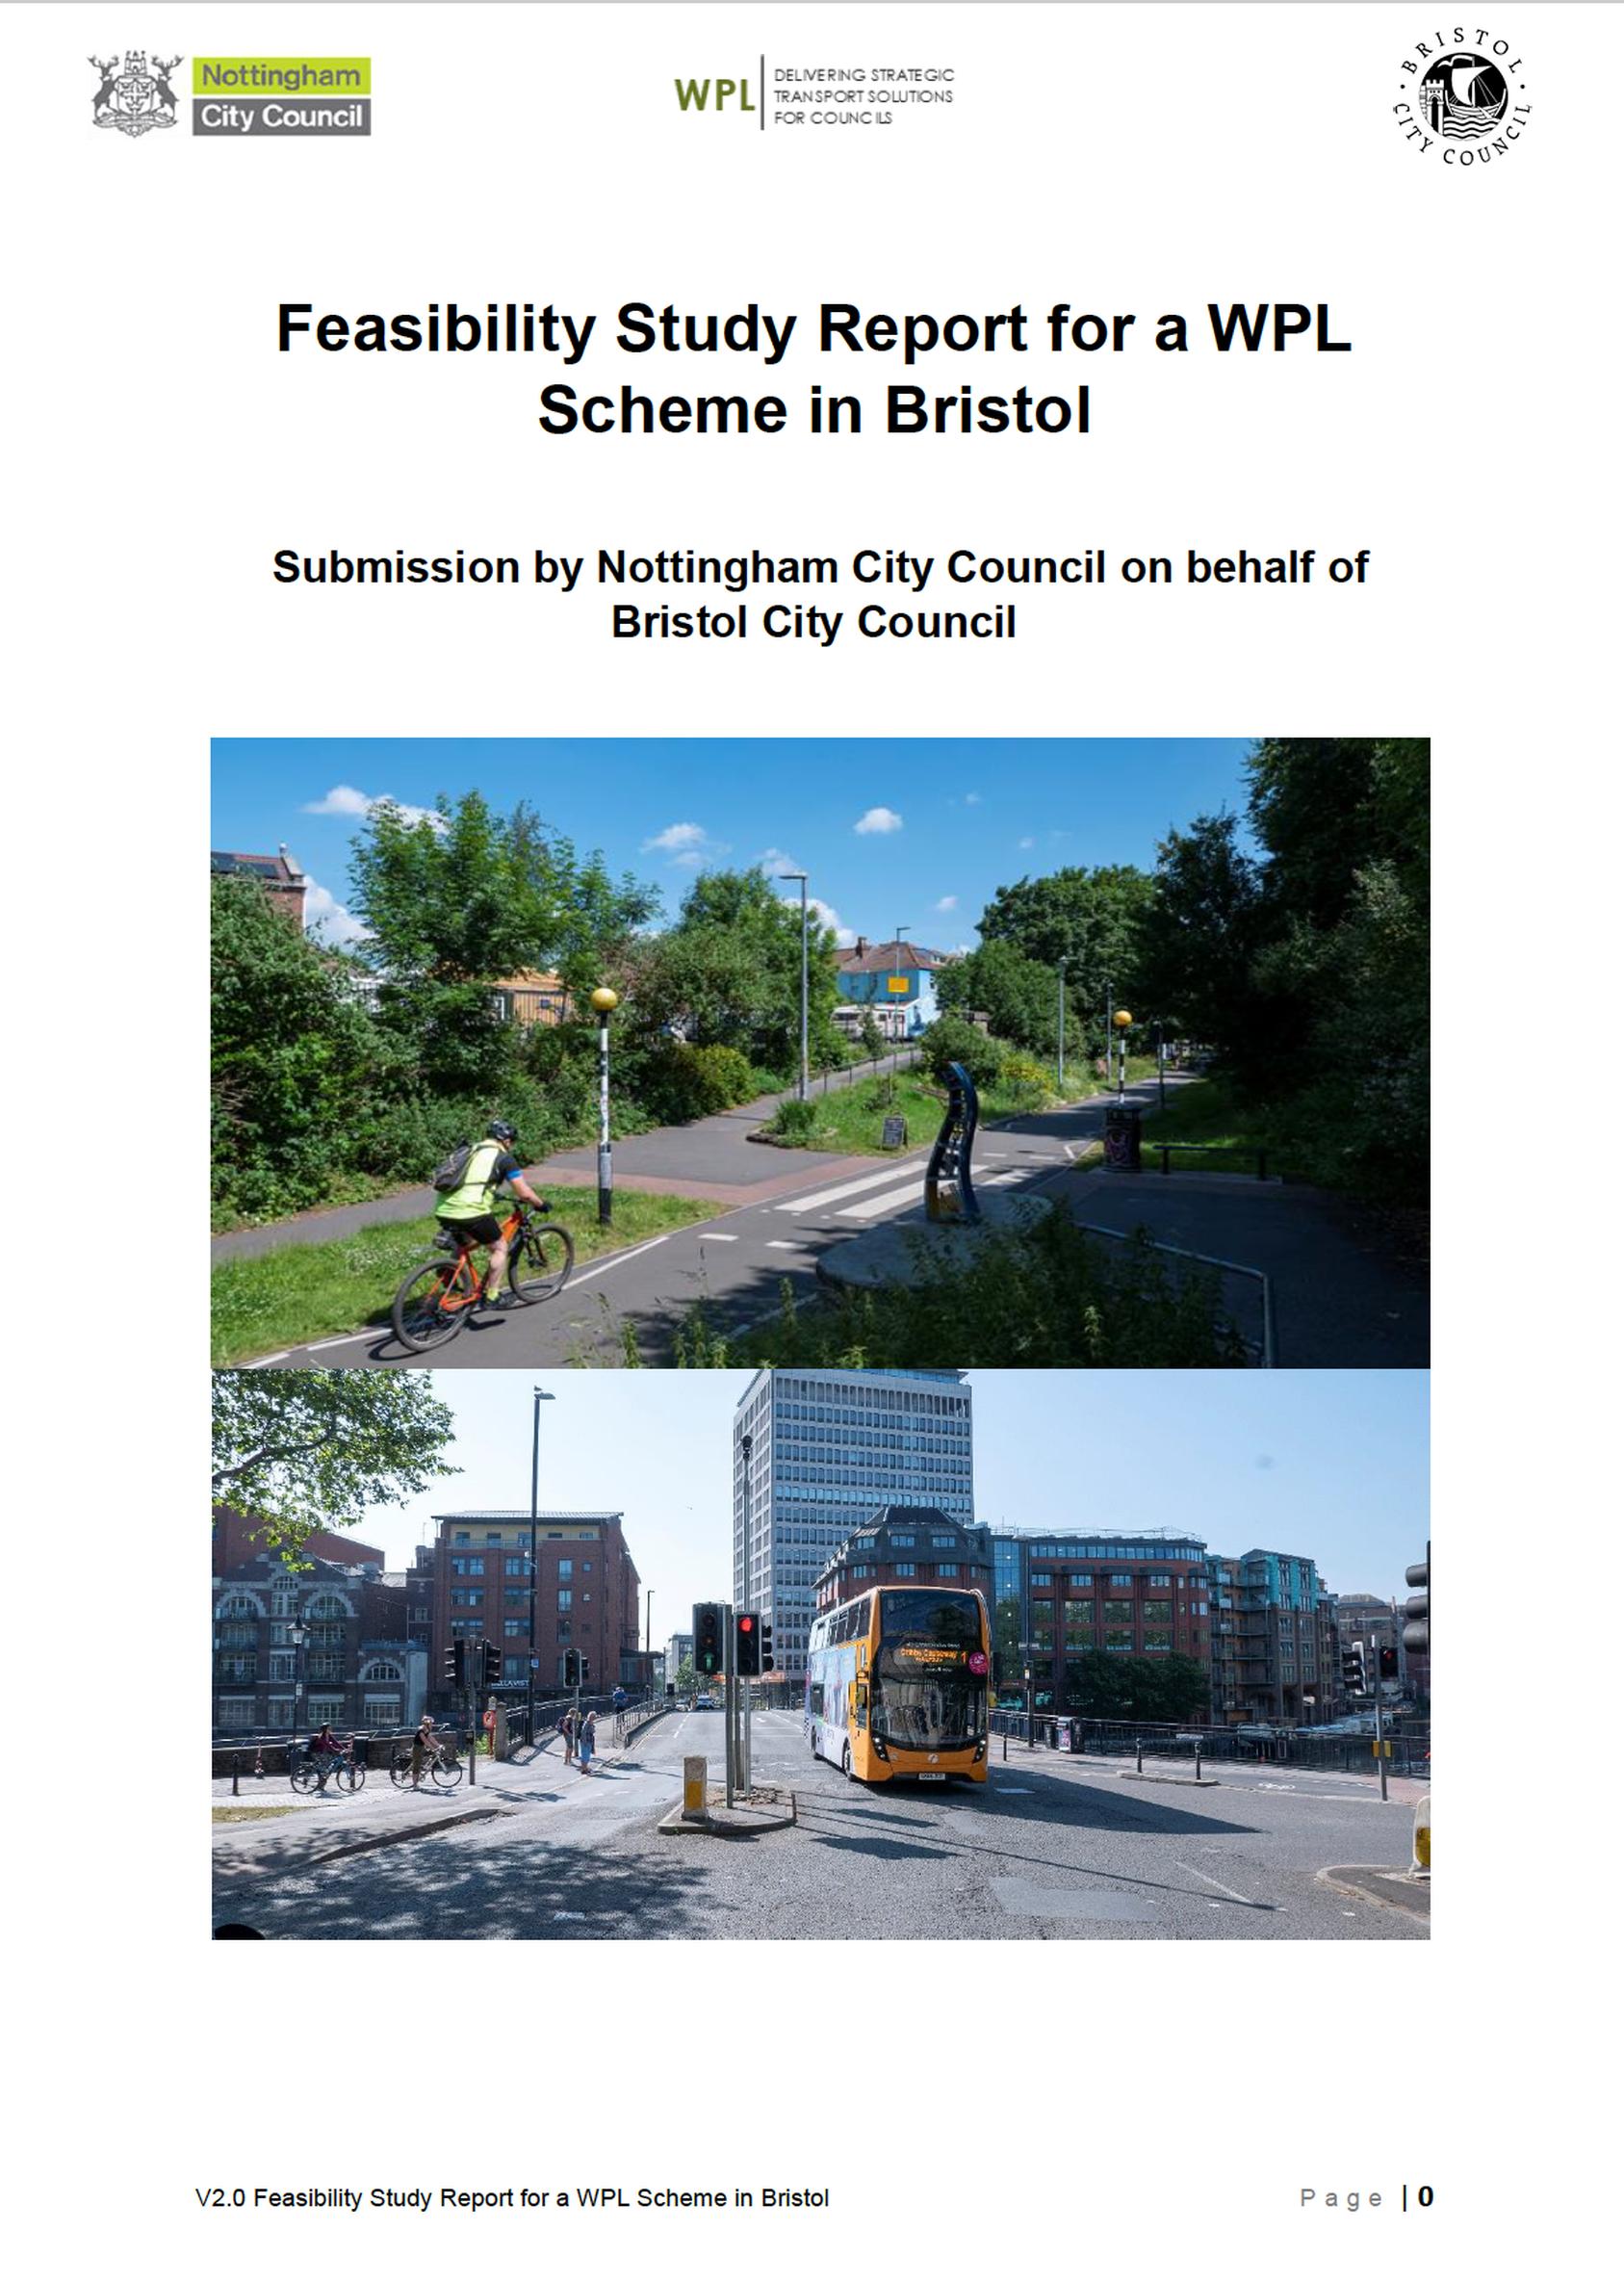 Bristol City Council commissioned Nottingham City Council to produce a WPL feasibility study